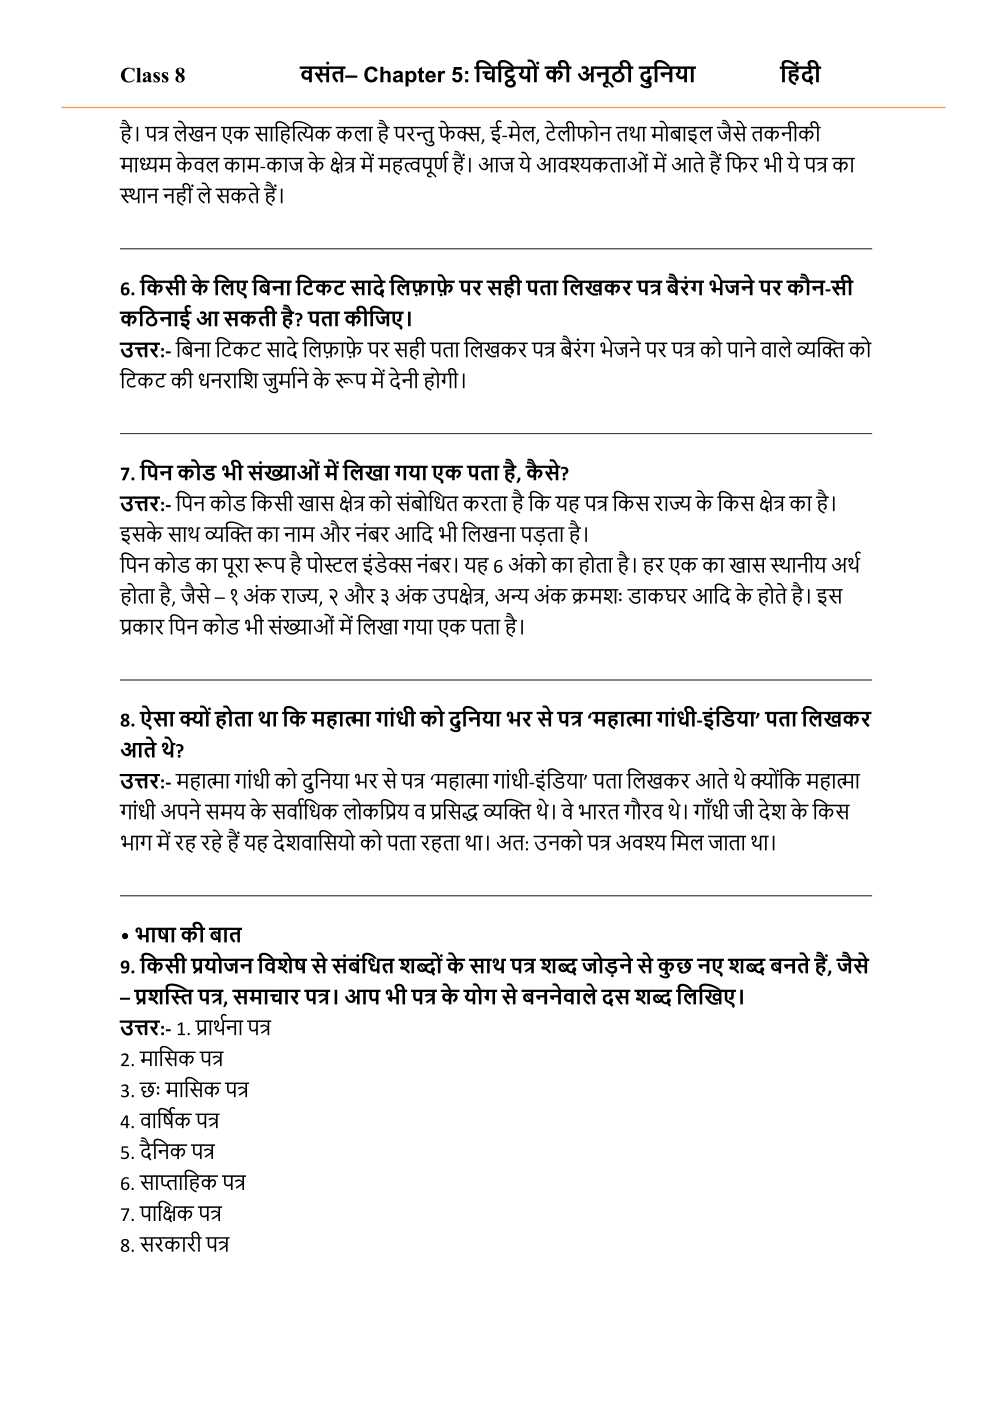 NCERT Solutions For Class 8 Hindi Vasant Chapter 5